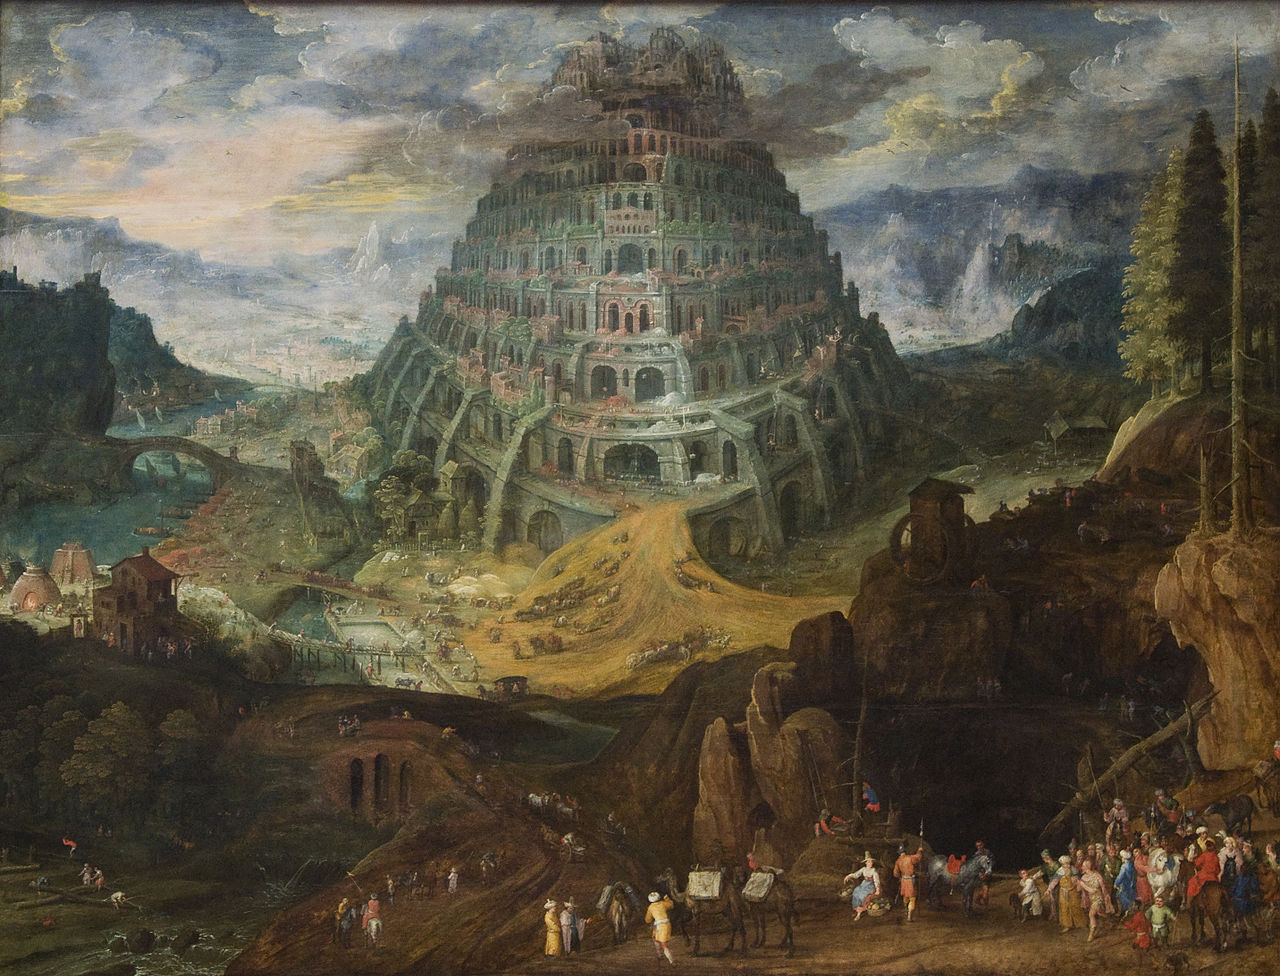 where was the tower of babel